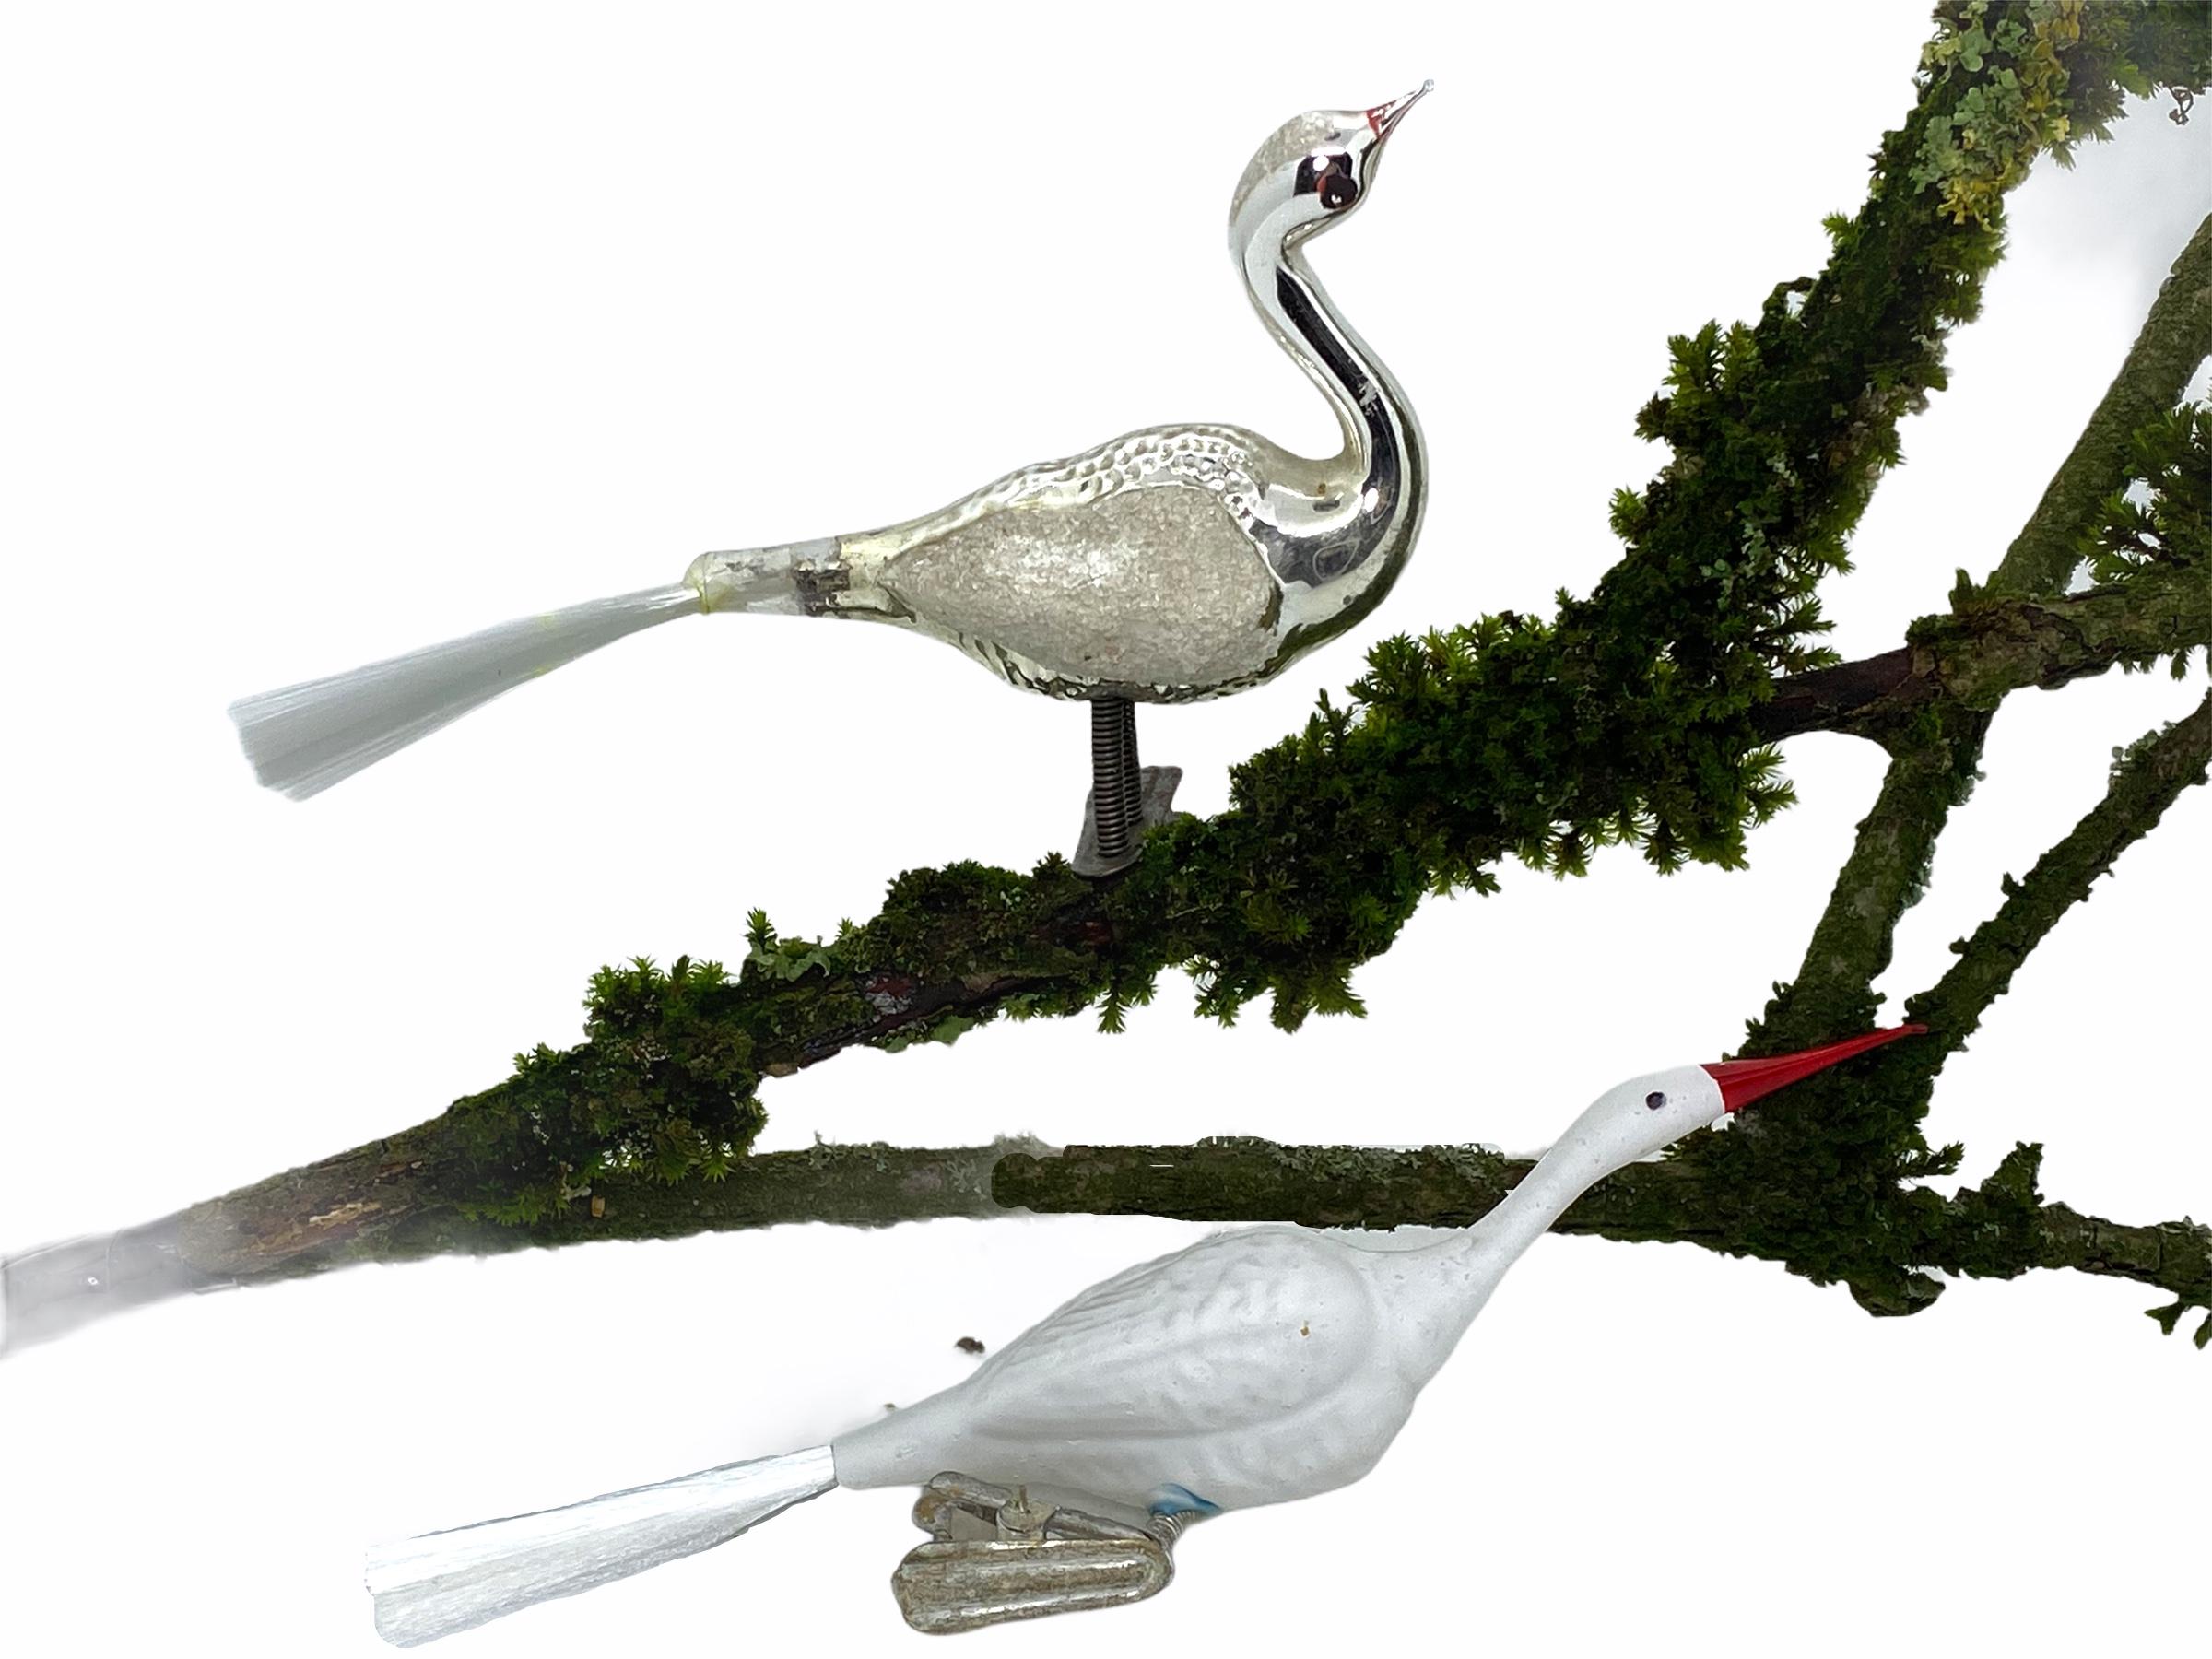 Two rare vintage clip-on bird ornaments, a swan and a stork. Swan measures approximate 3